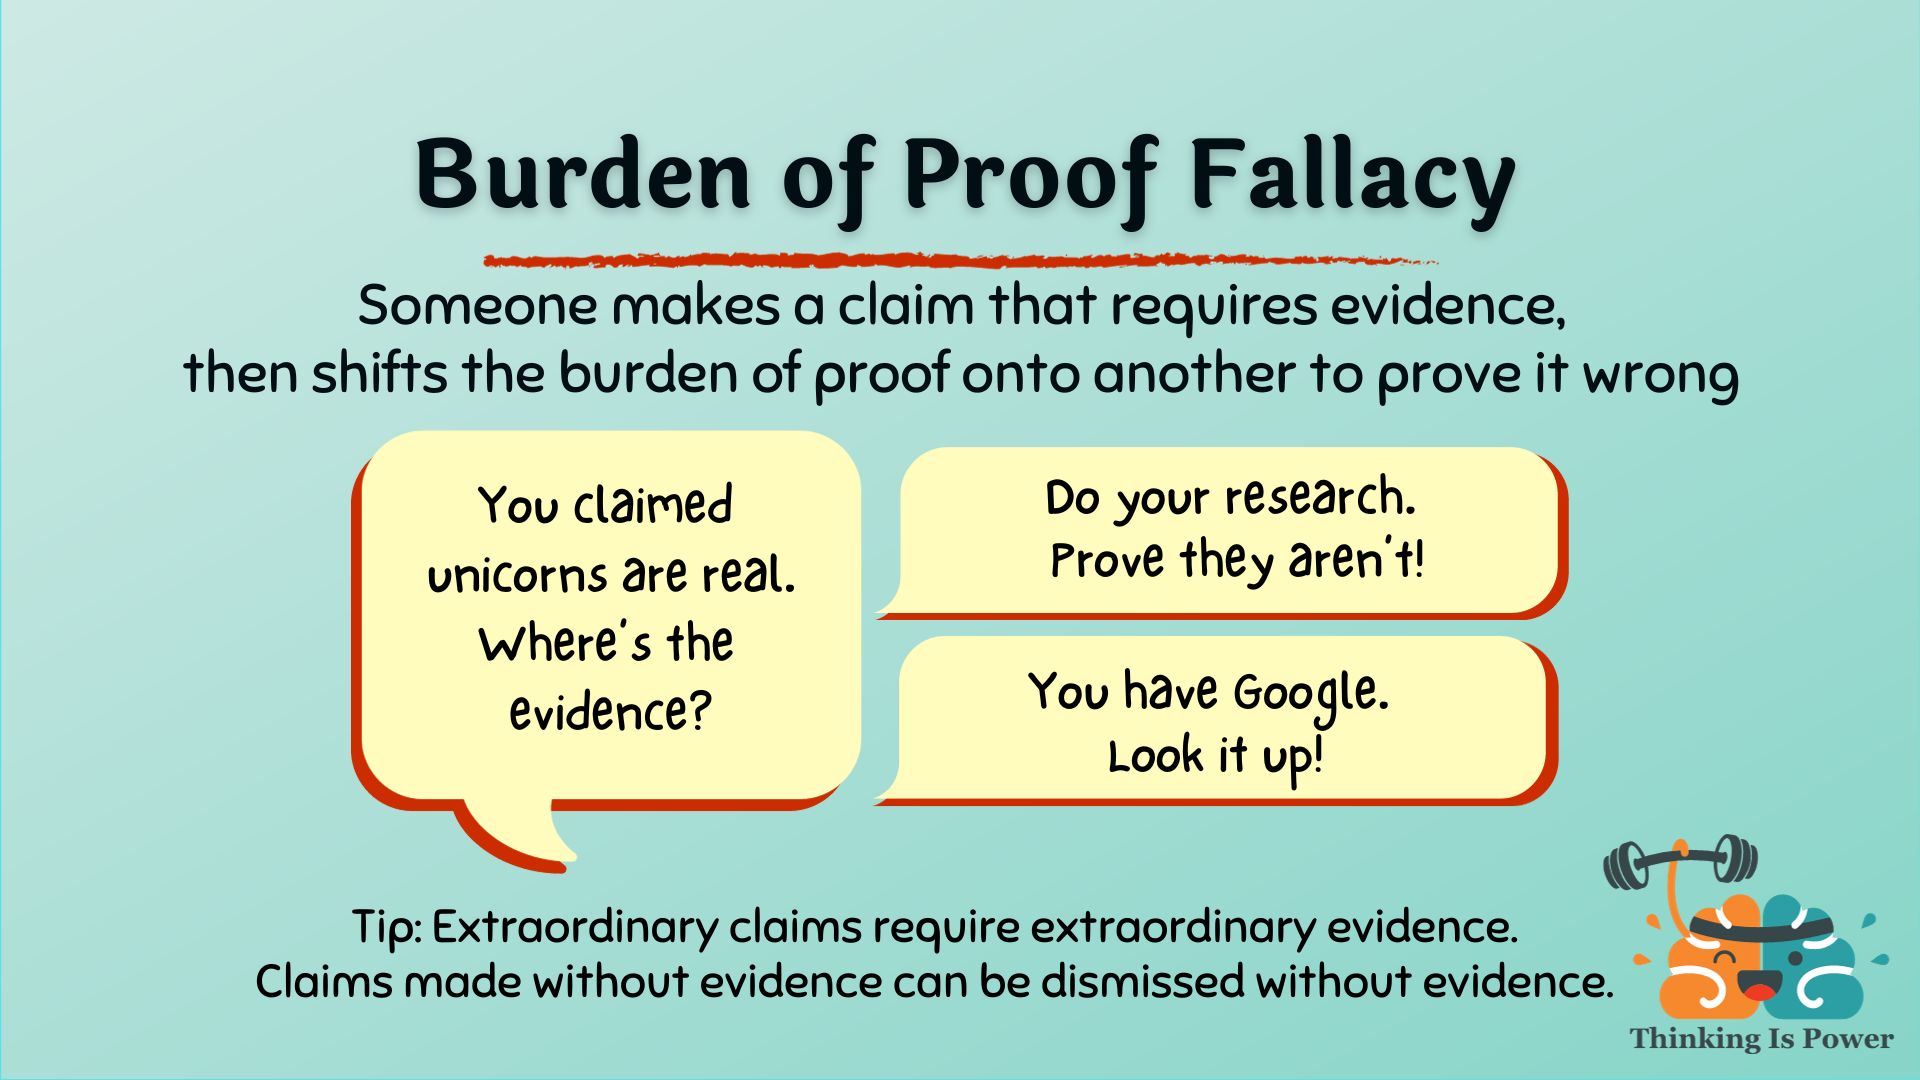 Burden of proof logical fallacy someone makes a claim that requires evidence, then shifts the burden of proof onto another to prove it wrong; example: You claimed unicorns exist. Where's the evidence? Responses: Do your research. Prove they aren't! You have Google. Look it up! TIP: Remember extraordinary claims require extraordinary evidence; claims made without evidence can be dismissed without evidence